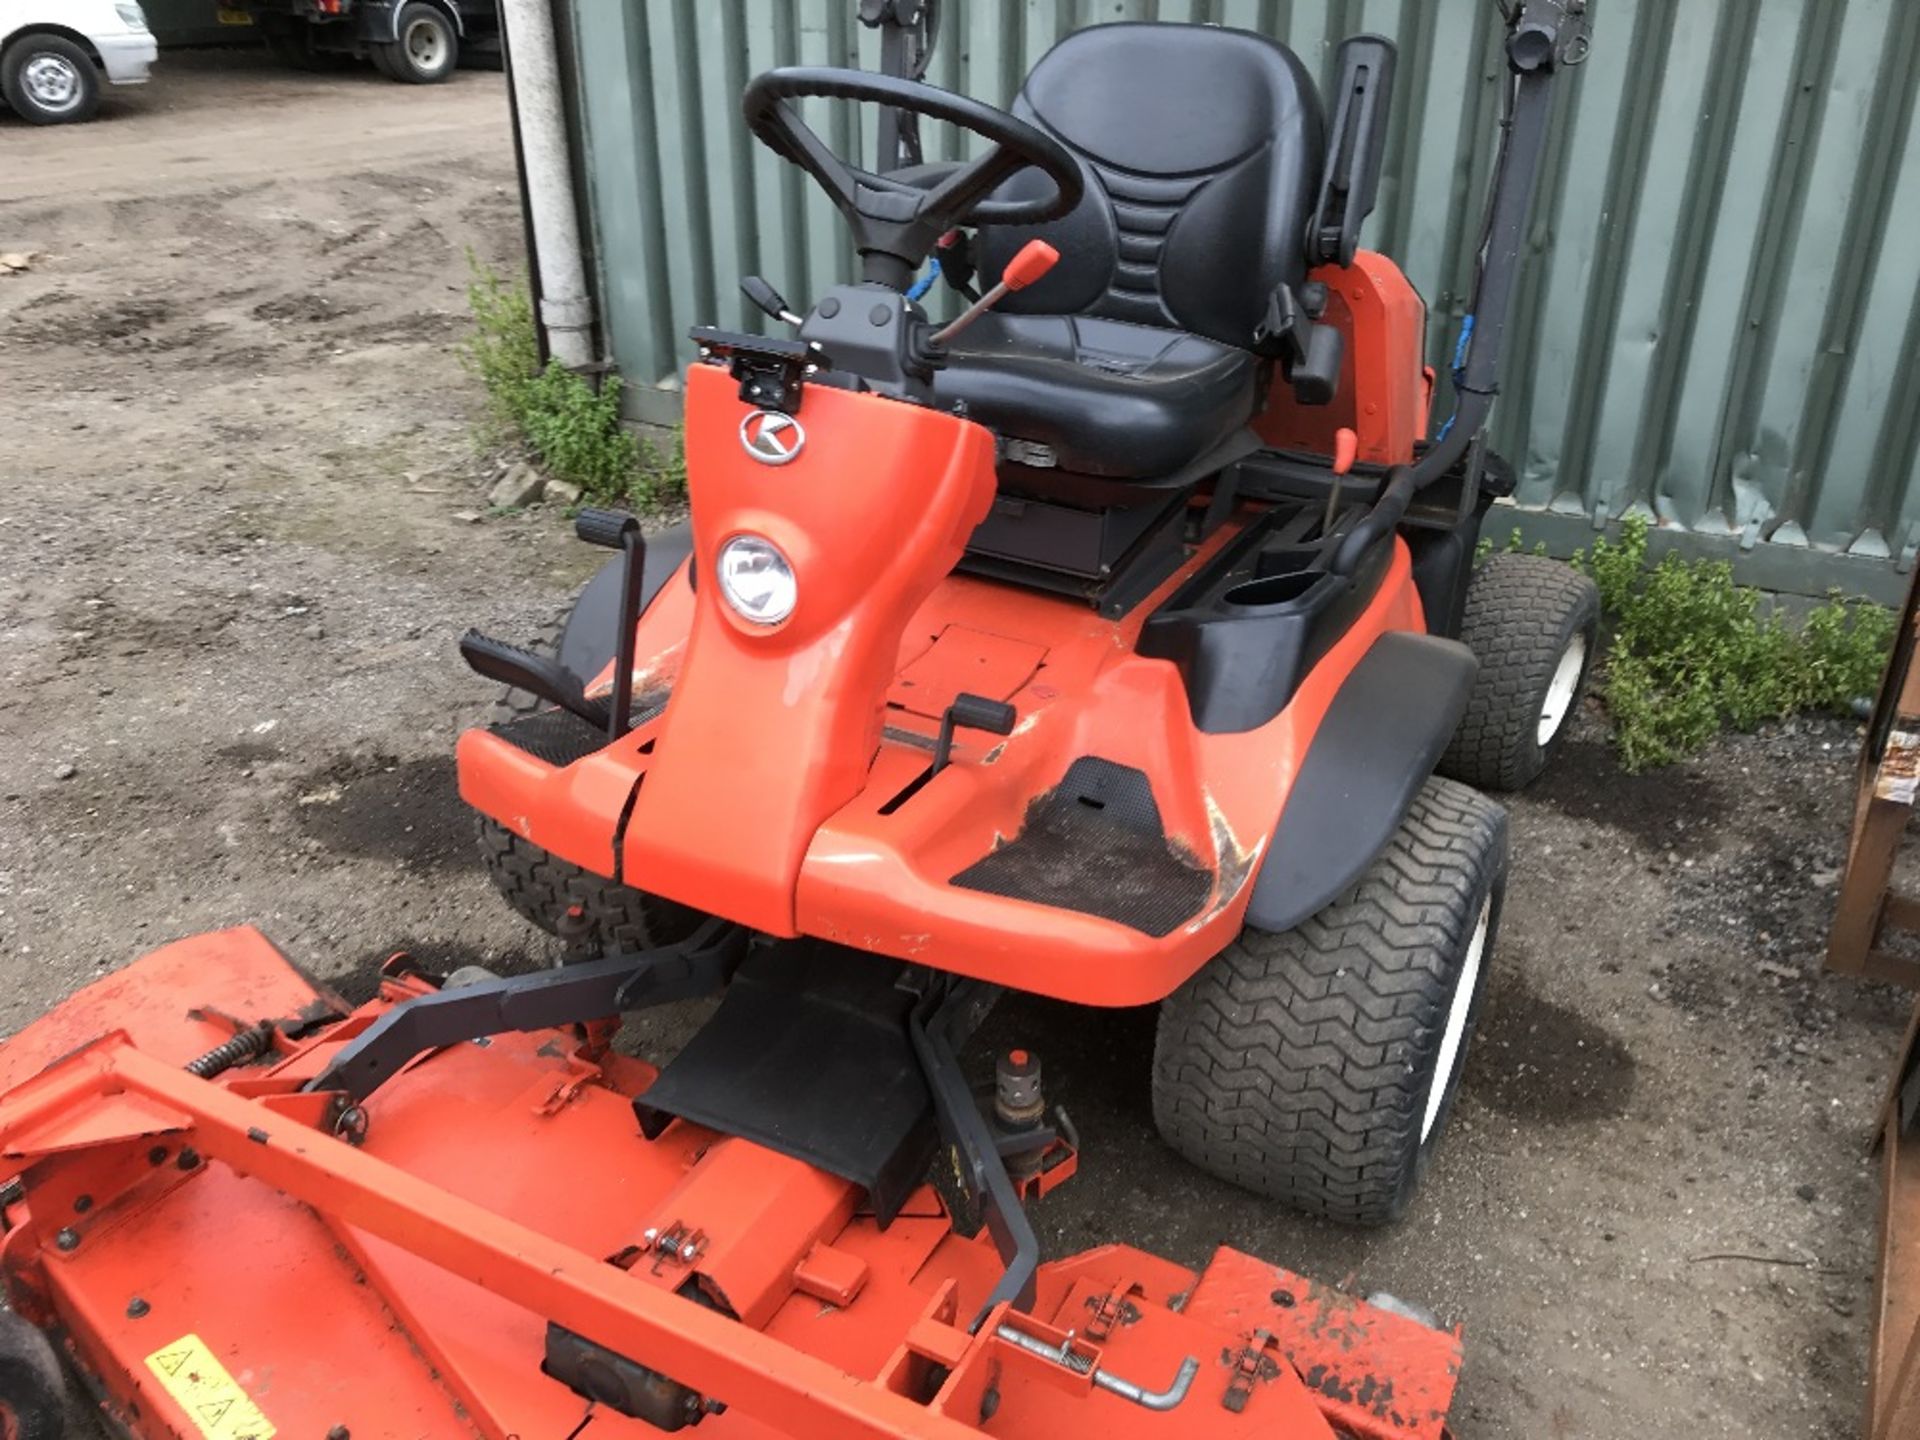 KUBOTA 2880 4WD OUTFRONT MOWER, 2670 REC.HRS. REG: SF14 HXM, V5 TO FOLLOW when tested was seen to